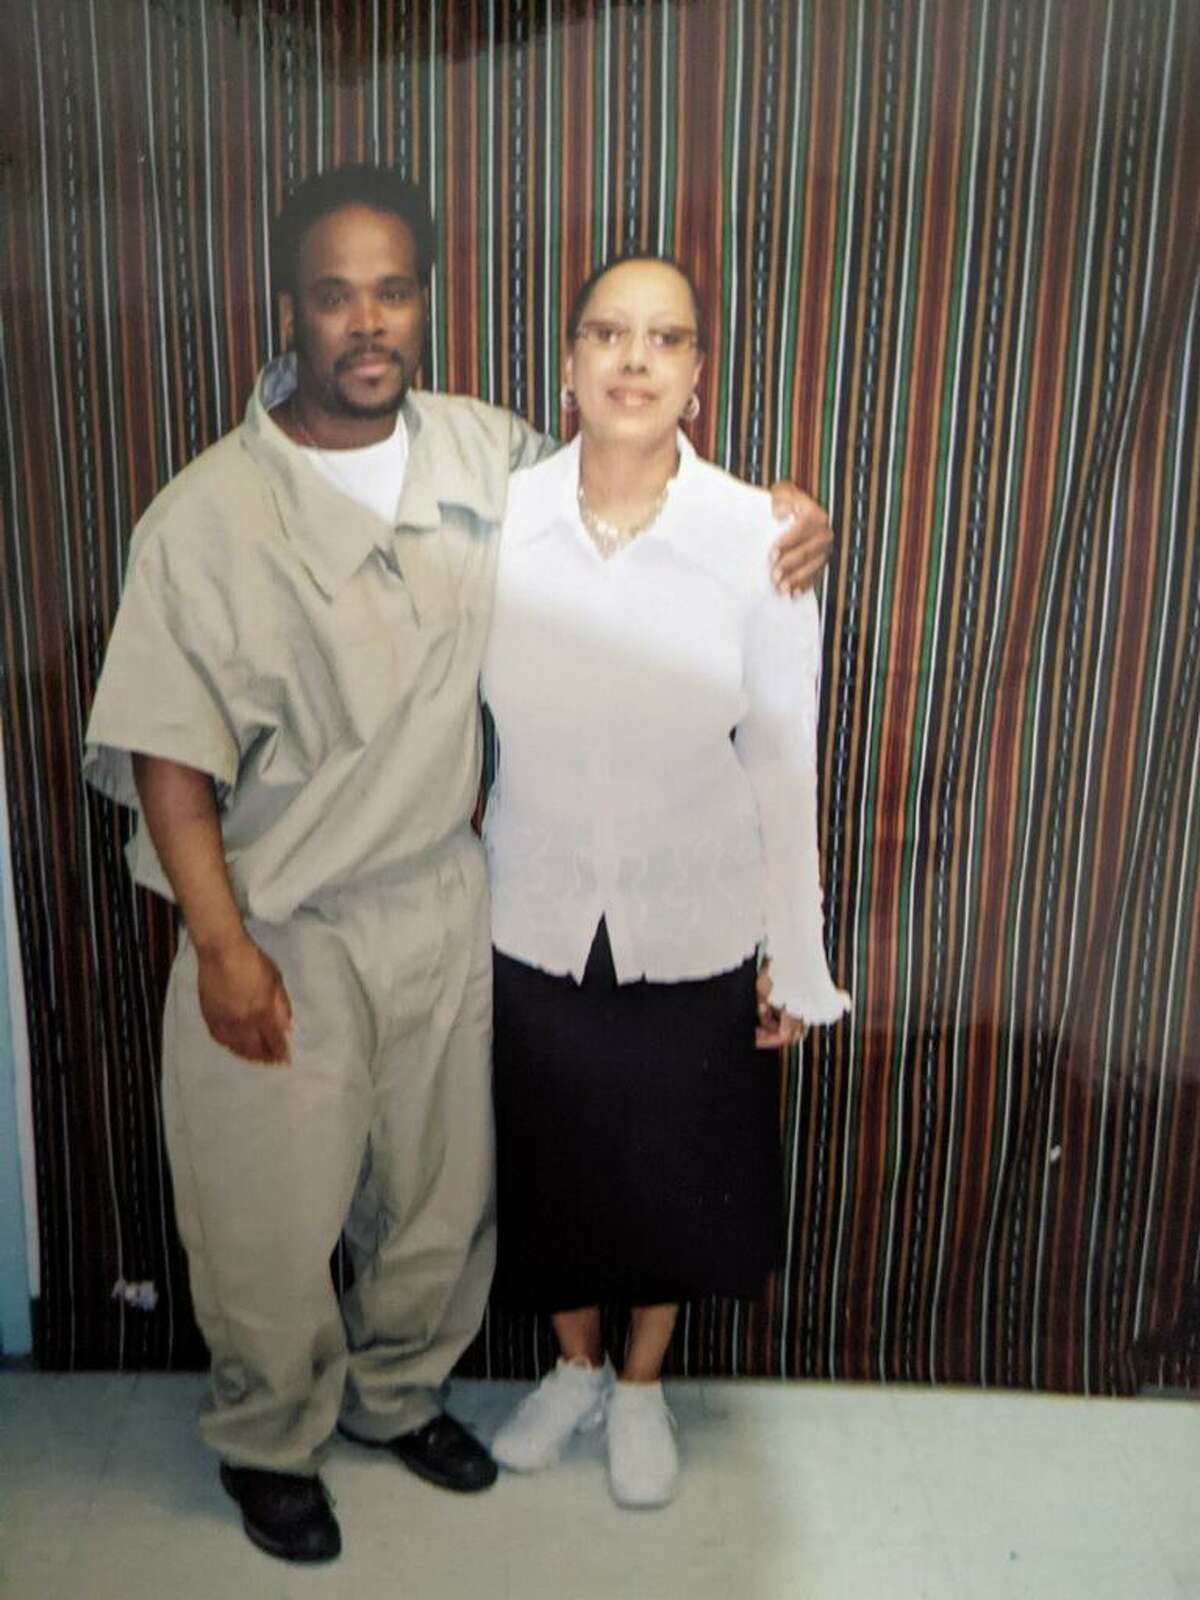 Michael Cox and his mother, Stephanie Hyman, taken while she was visiting him in prison.